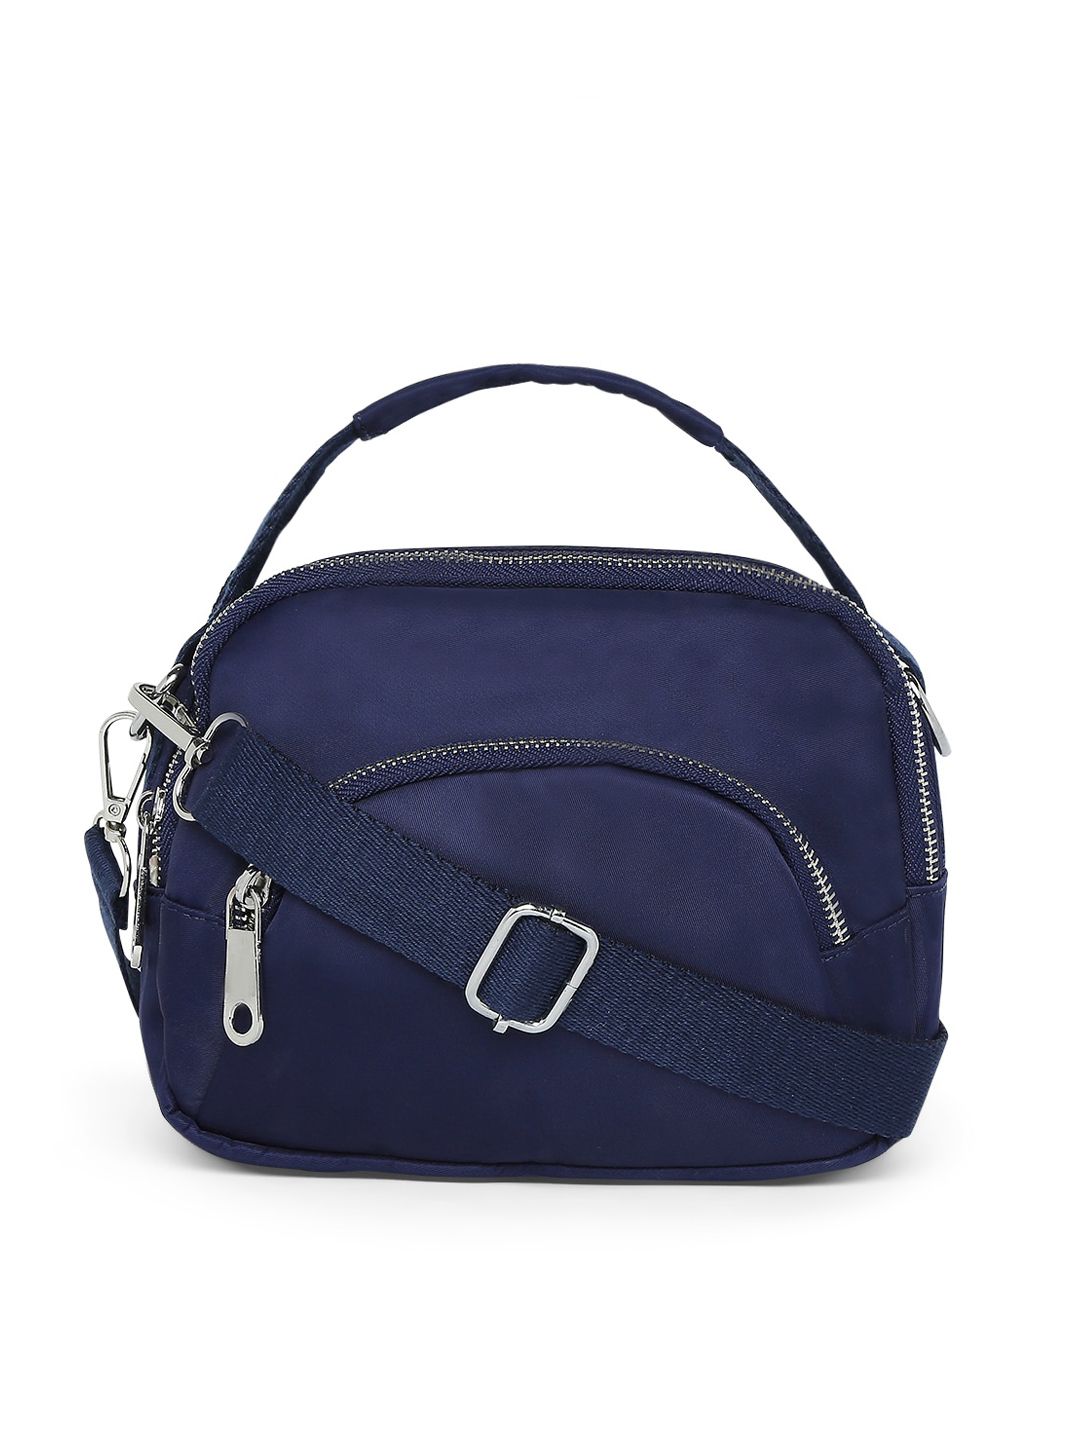 SATCHEL Blue Swagger Satchel Price in India